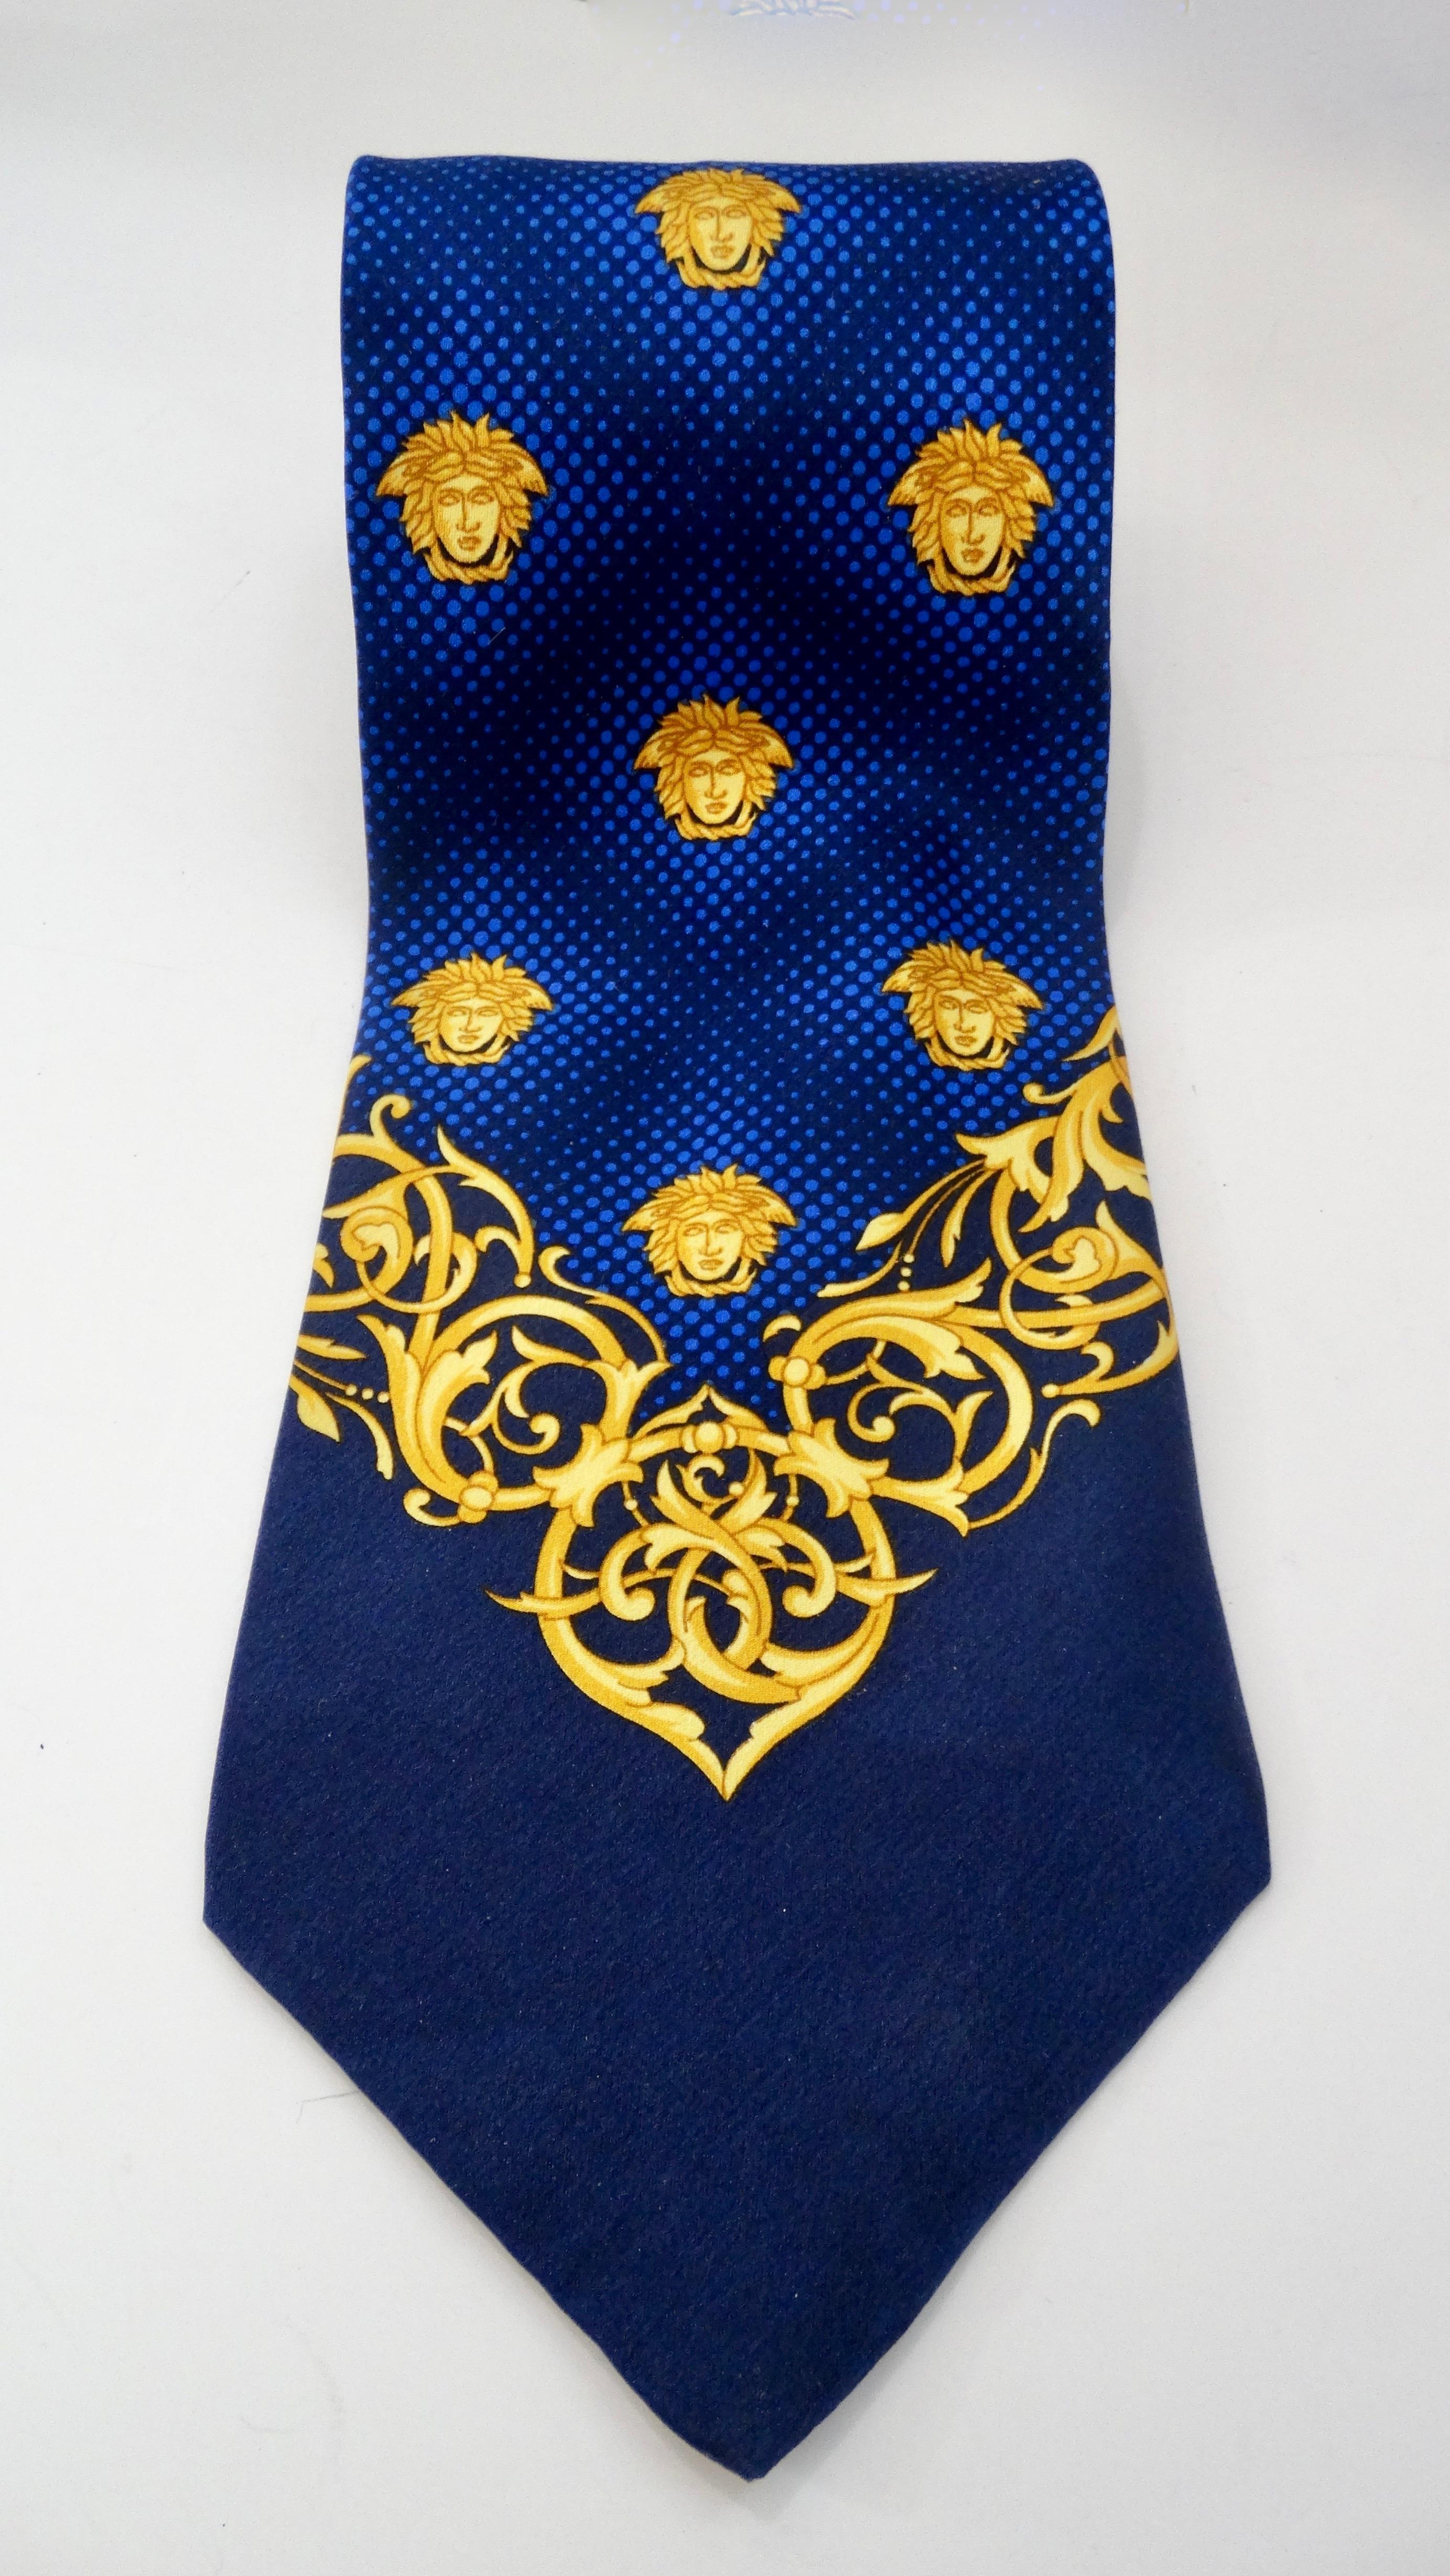 Elevate your look with this Gianni Versace tie! Circa 2000s, this Silk tie features two contrasting polka dot prints, a small Baroque trim, and the signature Versace Medusa head. The perfect tie to add to your wardrobe! Made in Spain and come with